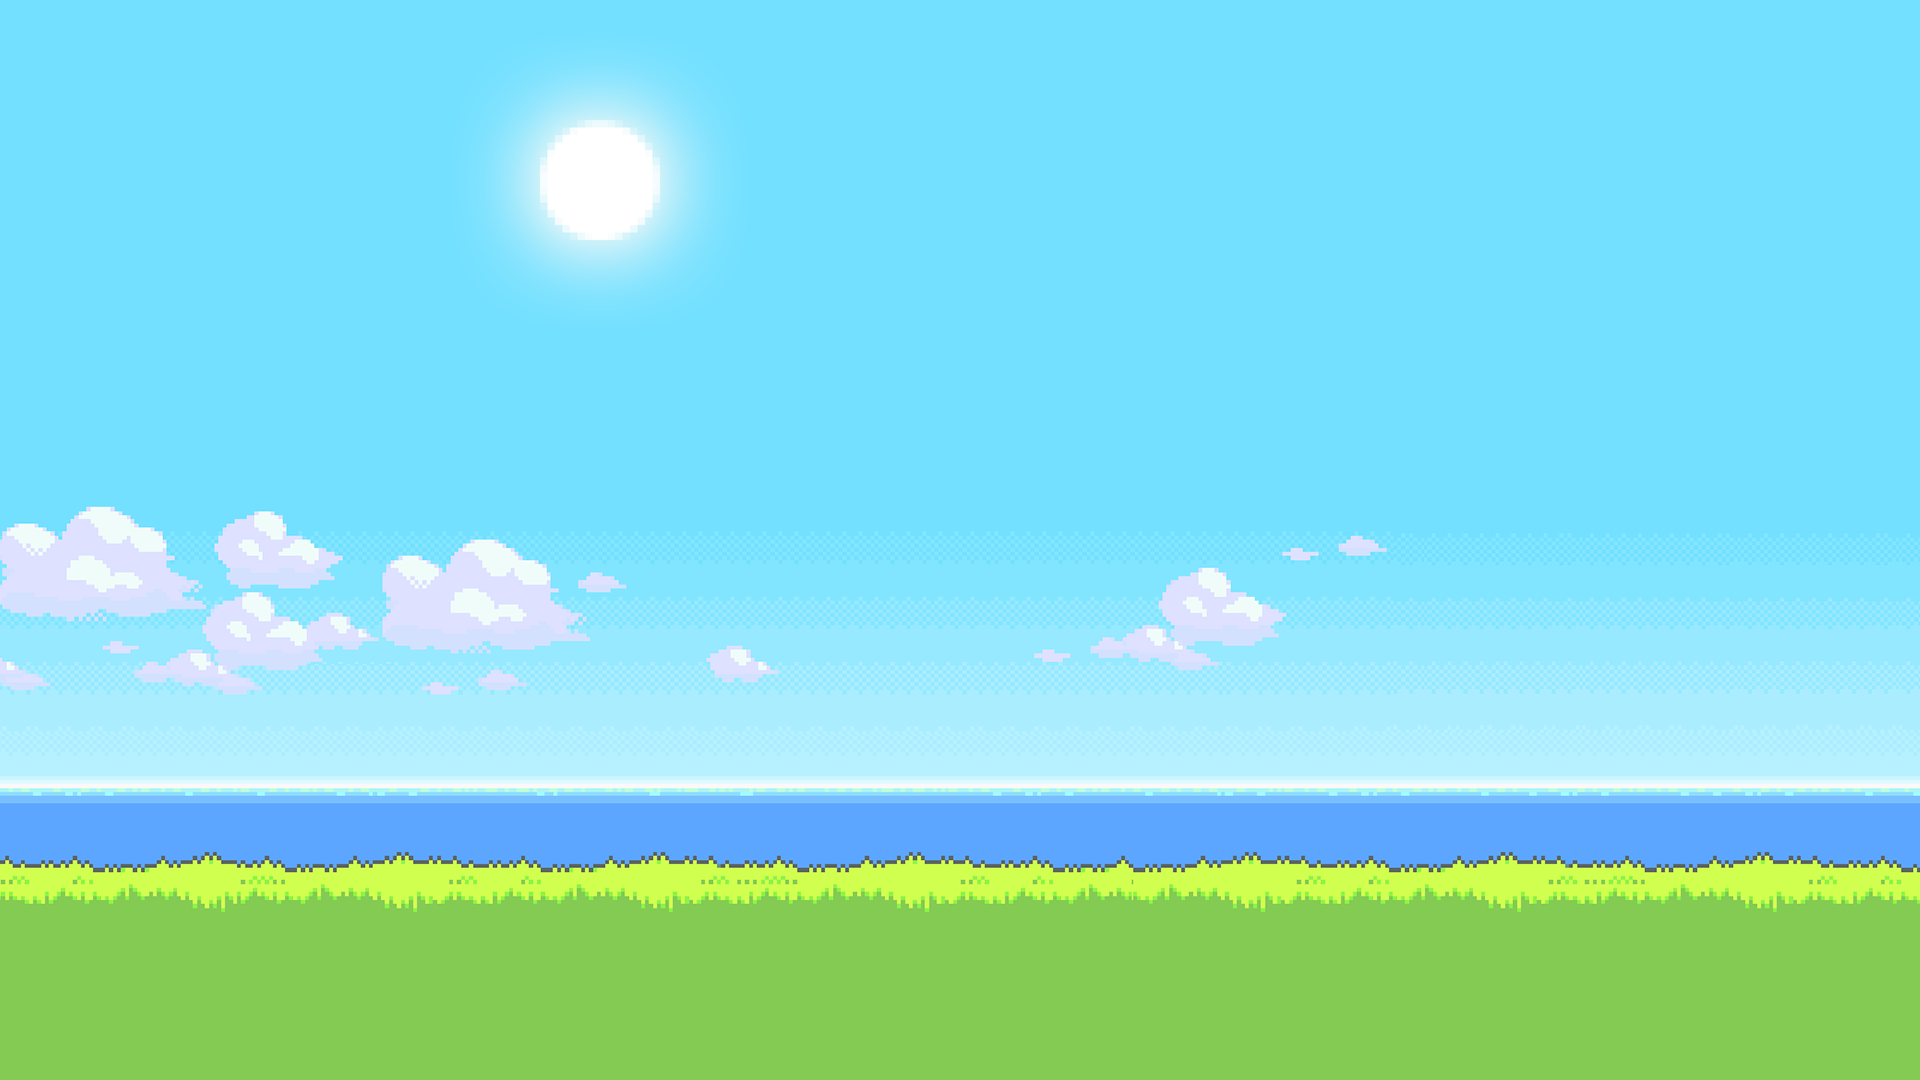 Afternoon   8 Bit Background Png Hd Wallpapers backgrounds